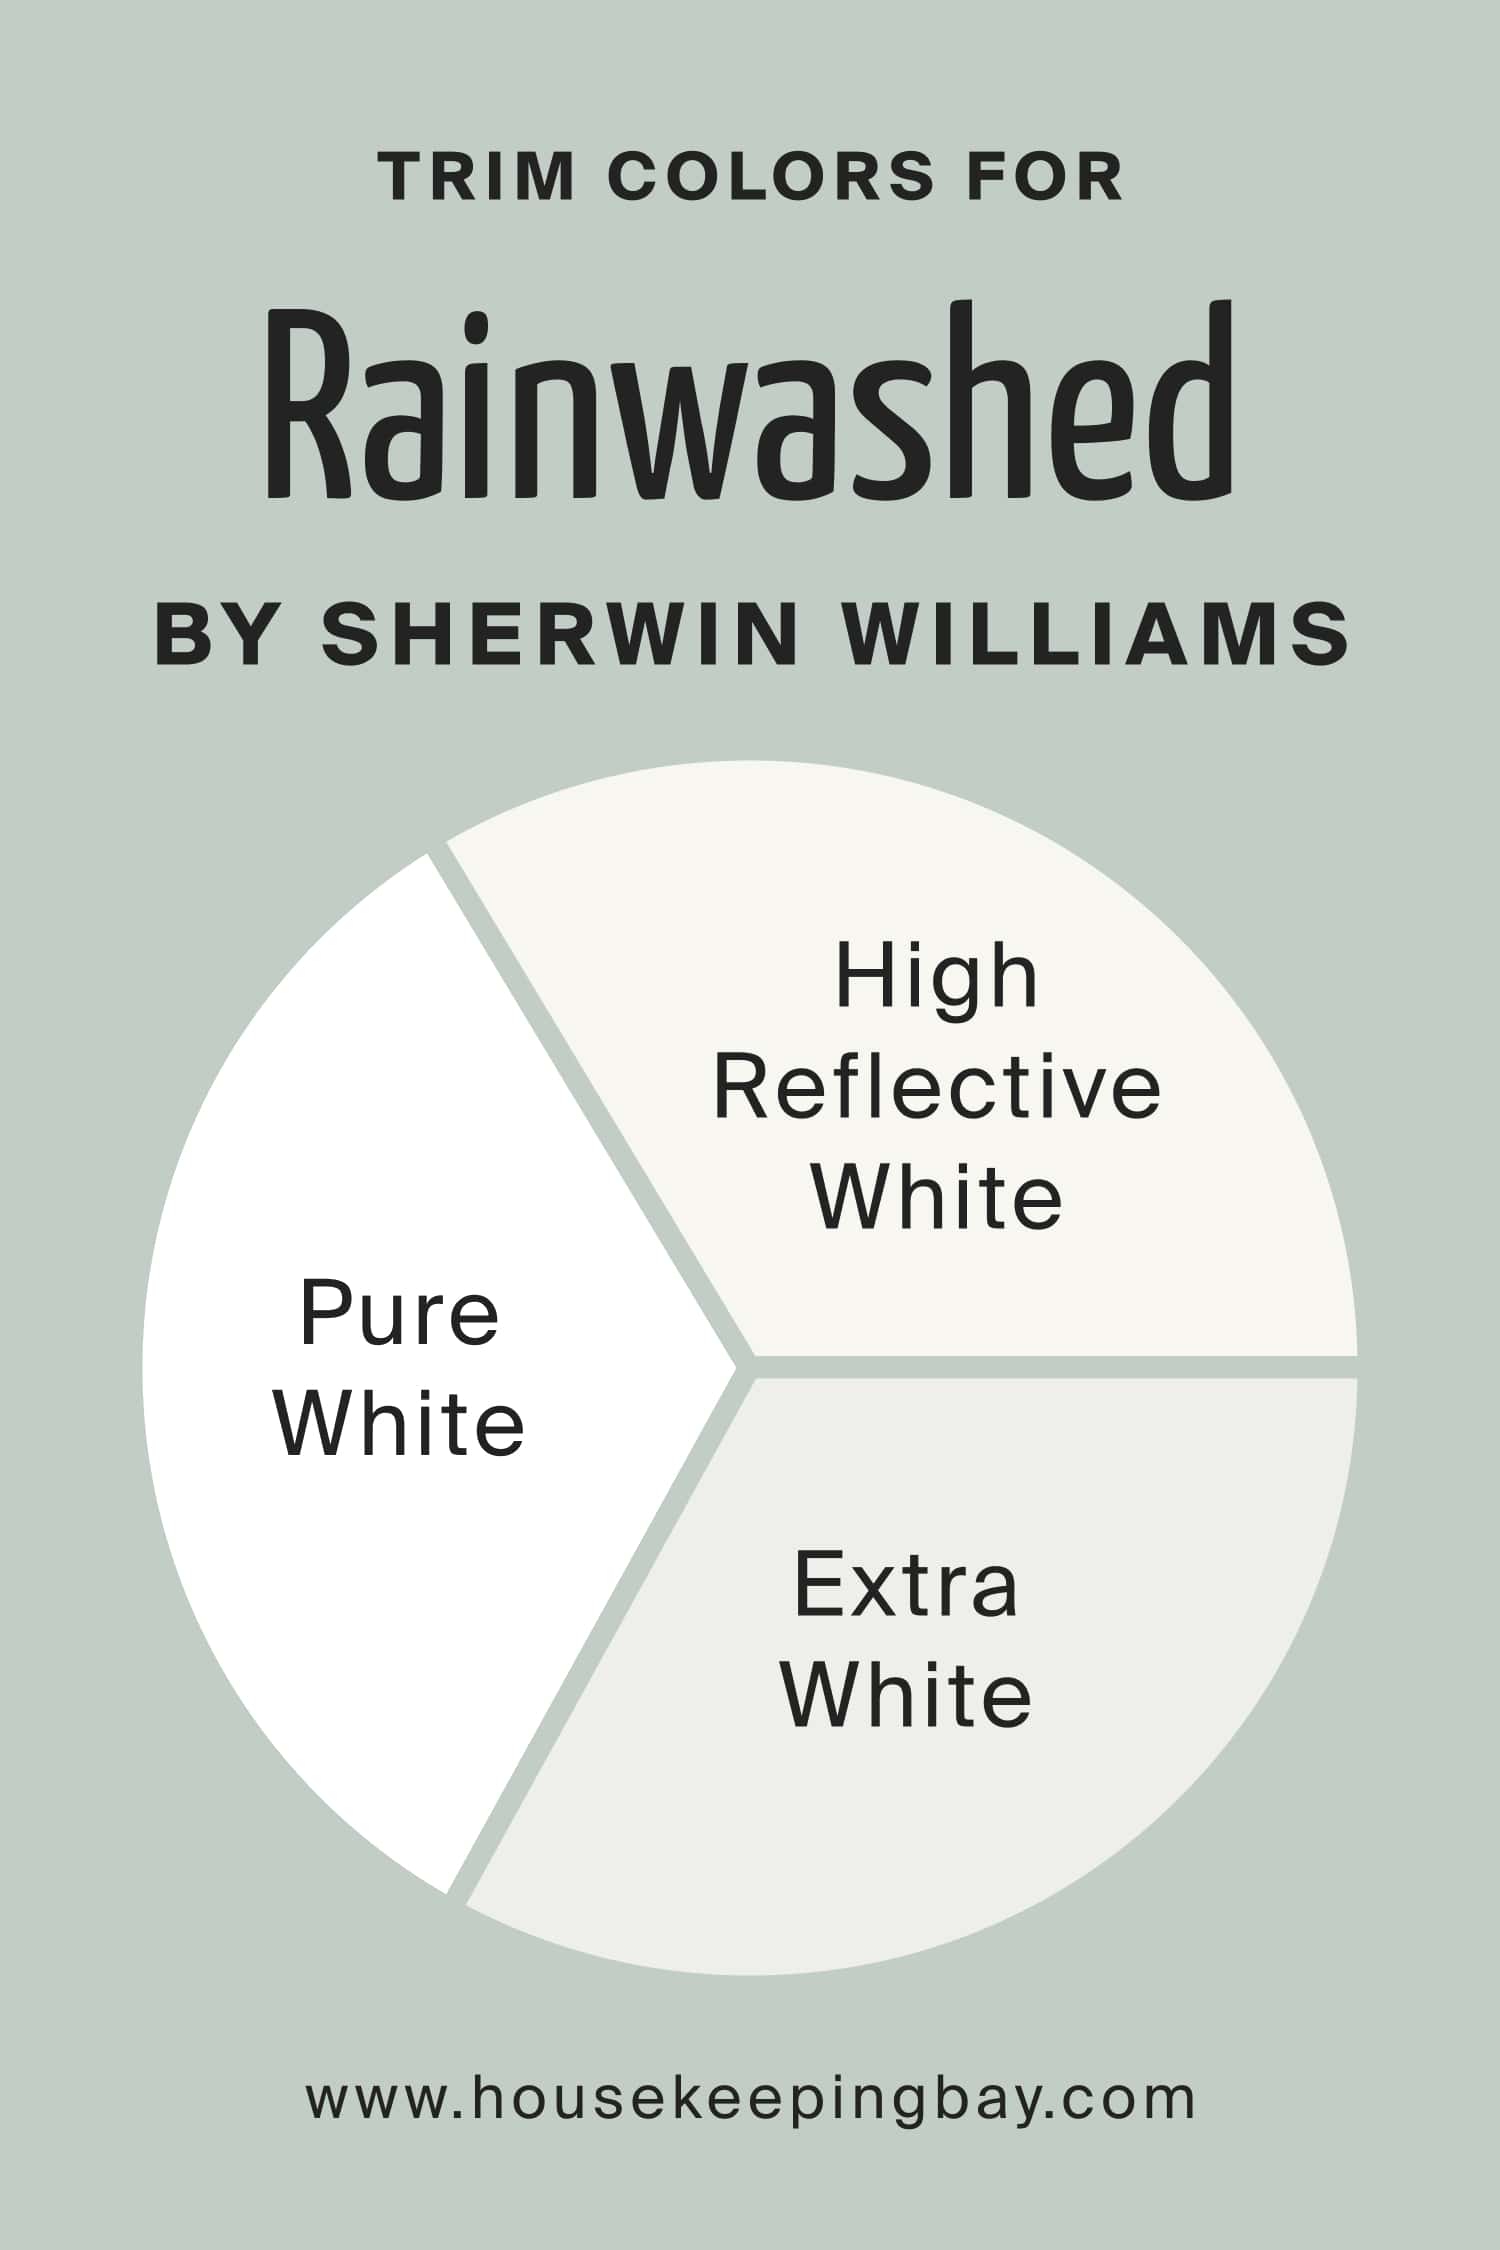 Trim Colors for Rainwashed by Sherwin Williams